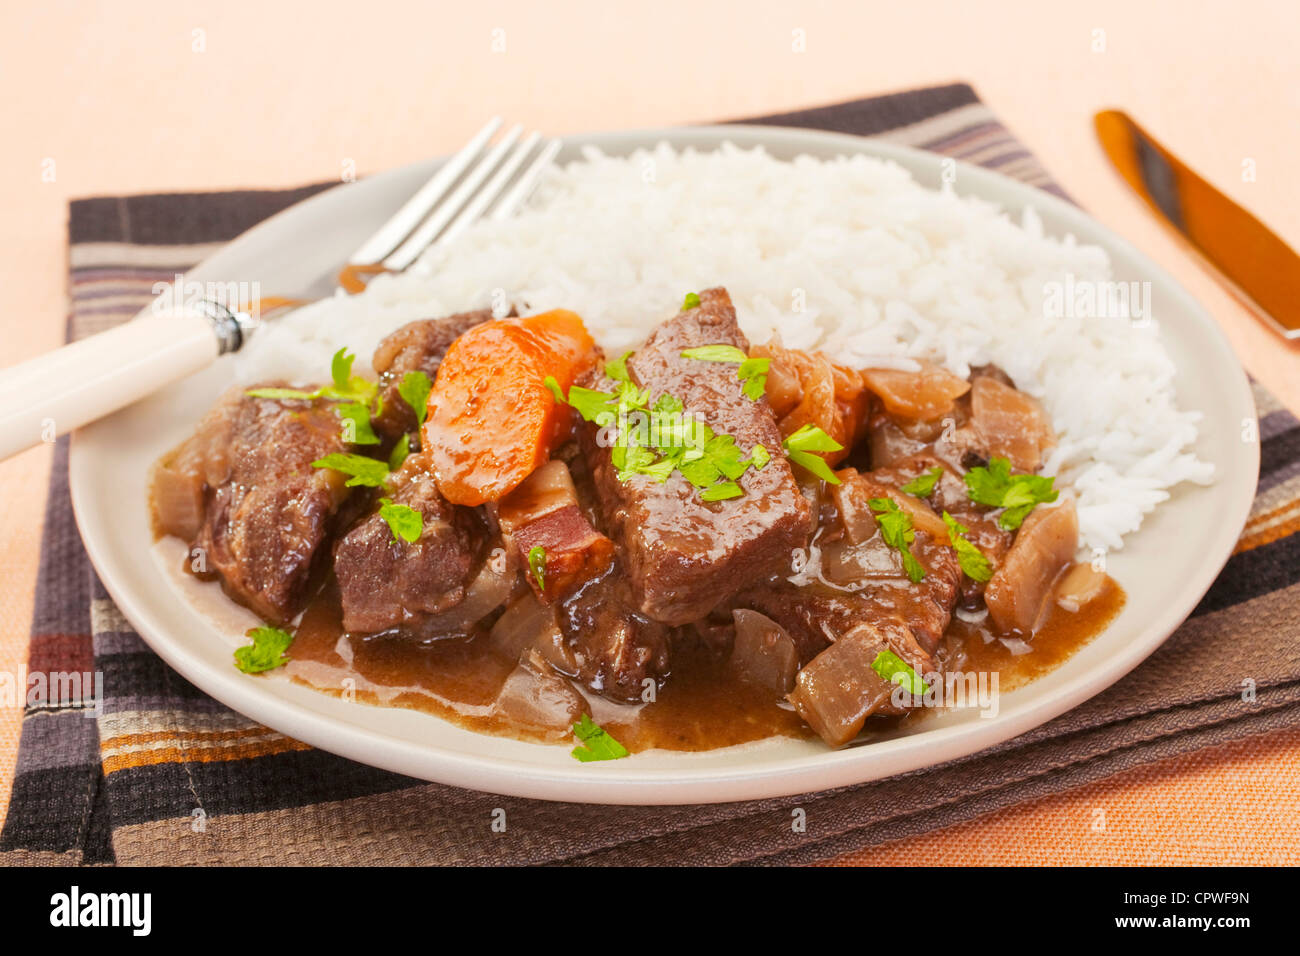 French beef stew in red wine, on a plate with rice. Known as daube de boeuf Provencal. Stock Photo